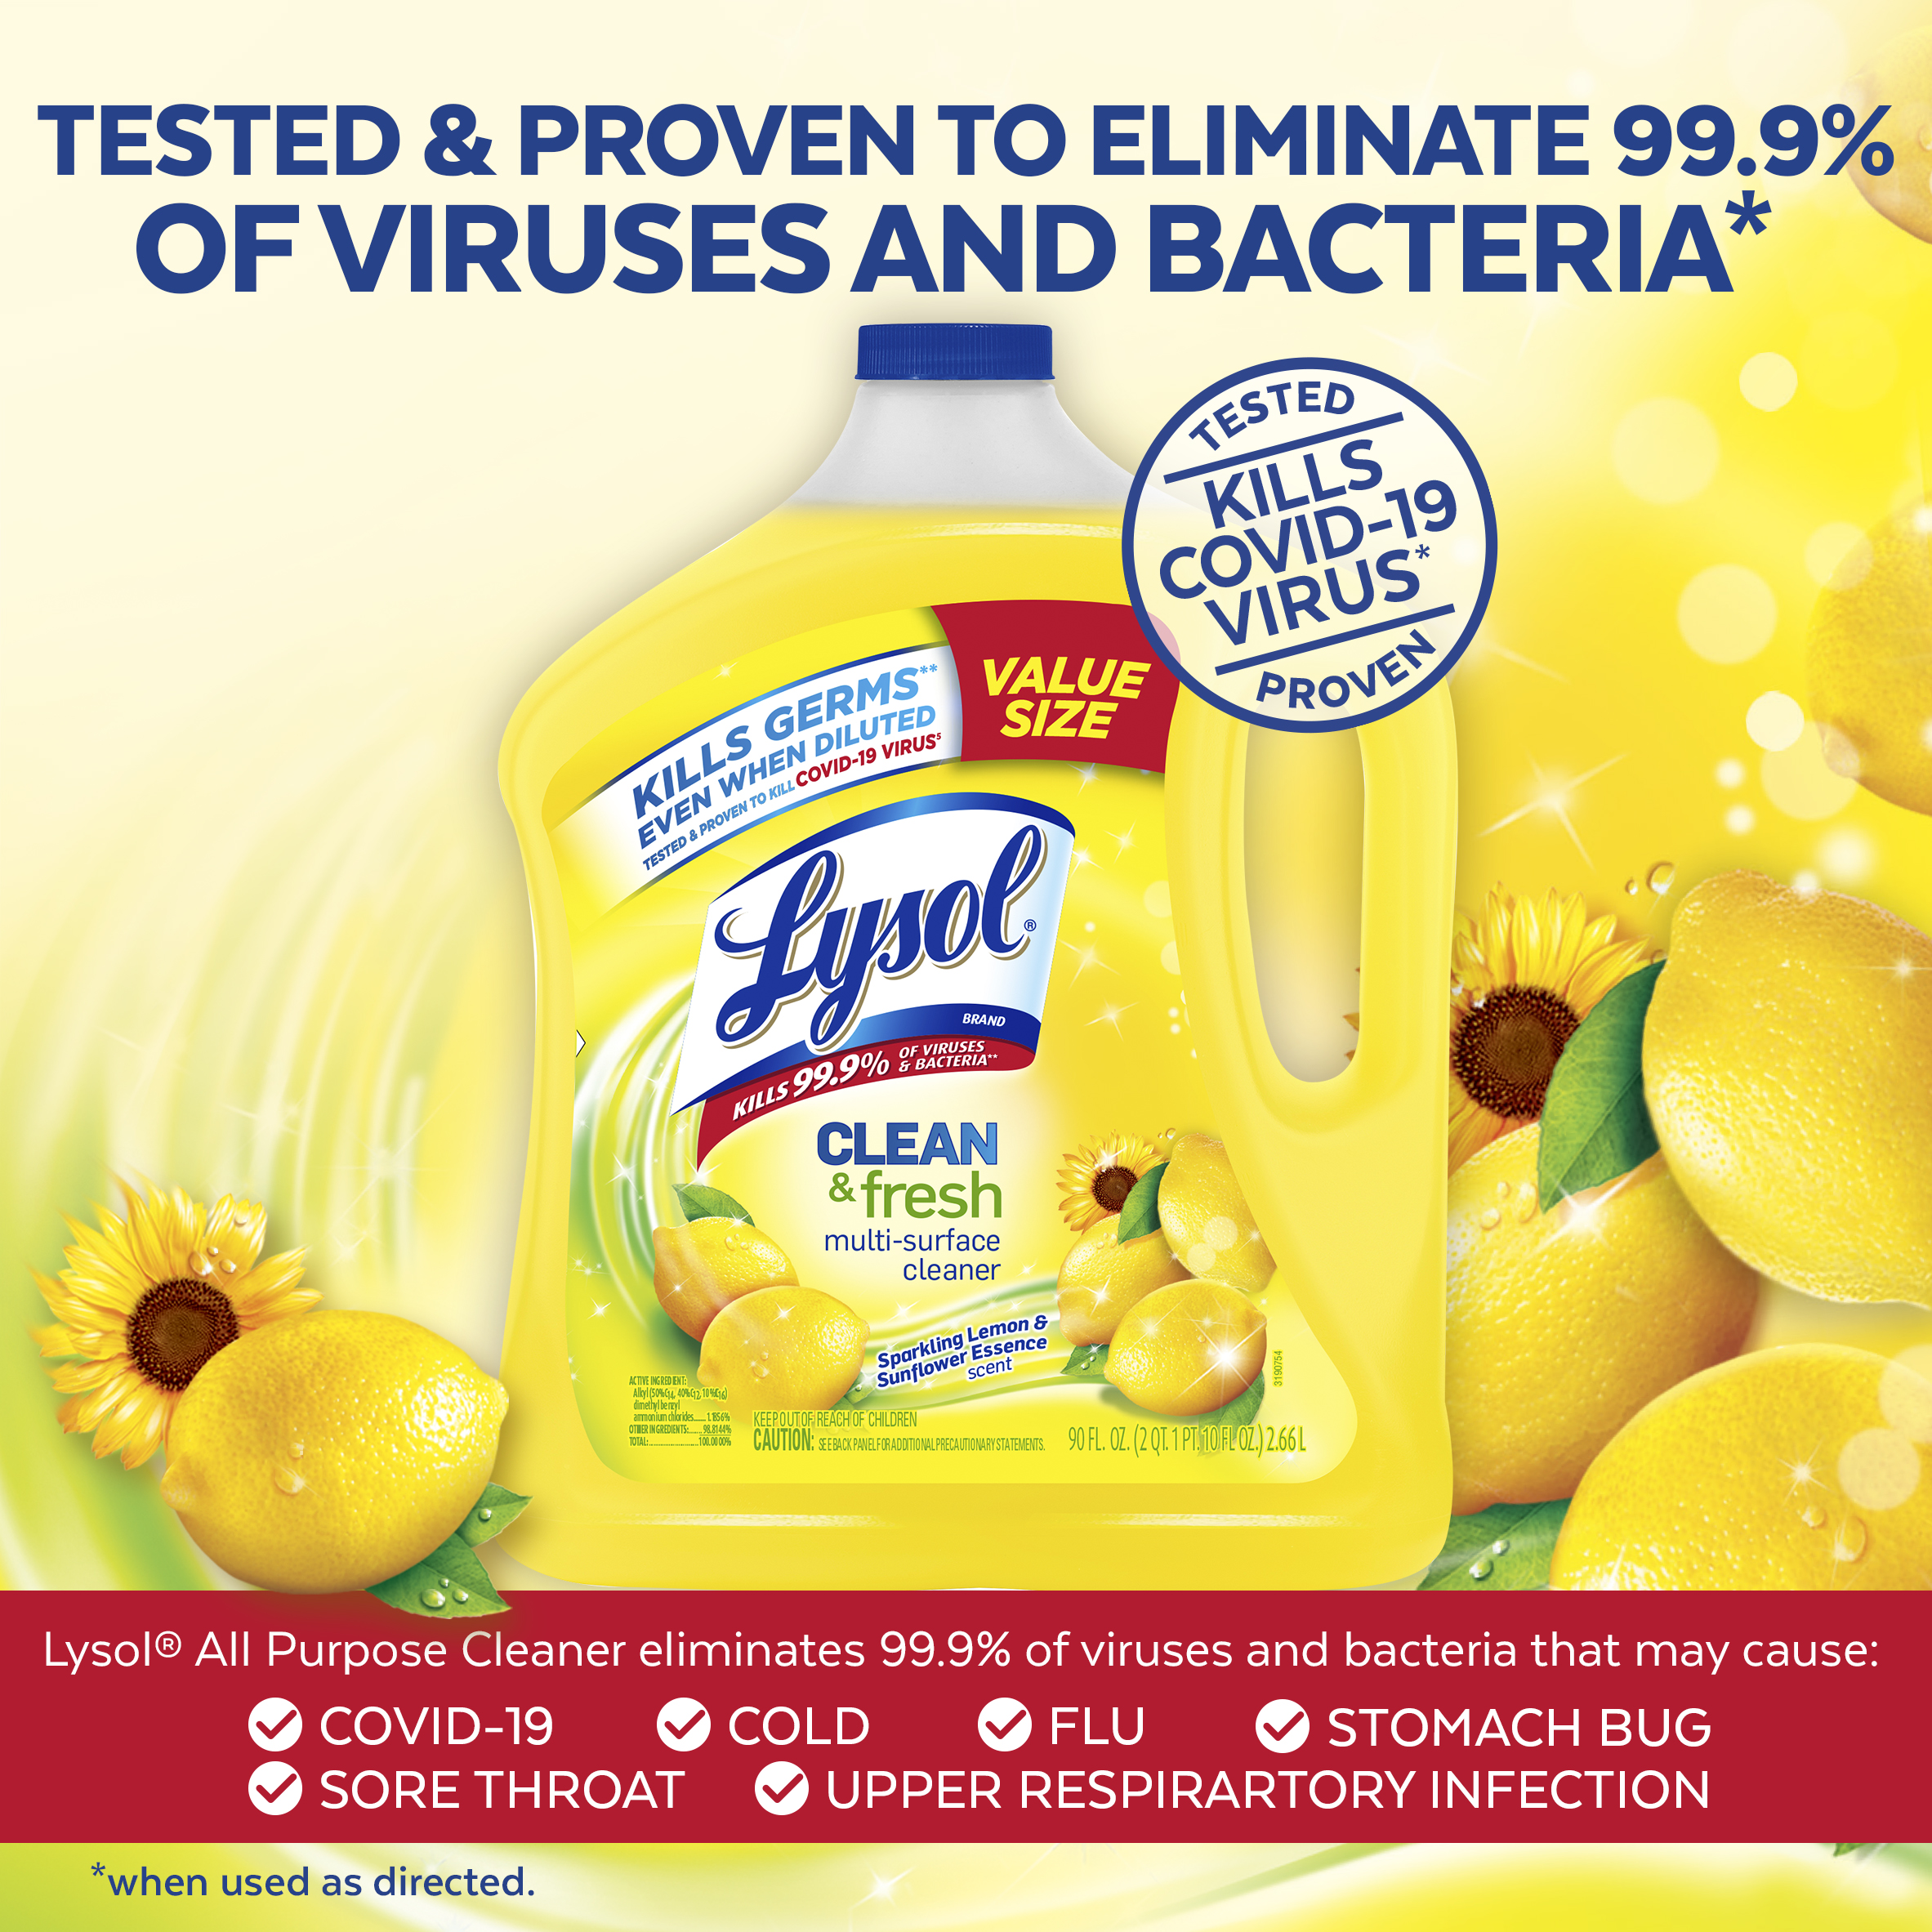 Lysol Multi-Surface Cleaner, Sanitizing and Disinfecting Pour, to Clean and Deodorize, Sparkling Lemon and Sunflower Essence, 90 Fl Oz. - image 3 of 6